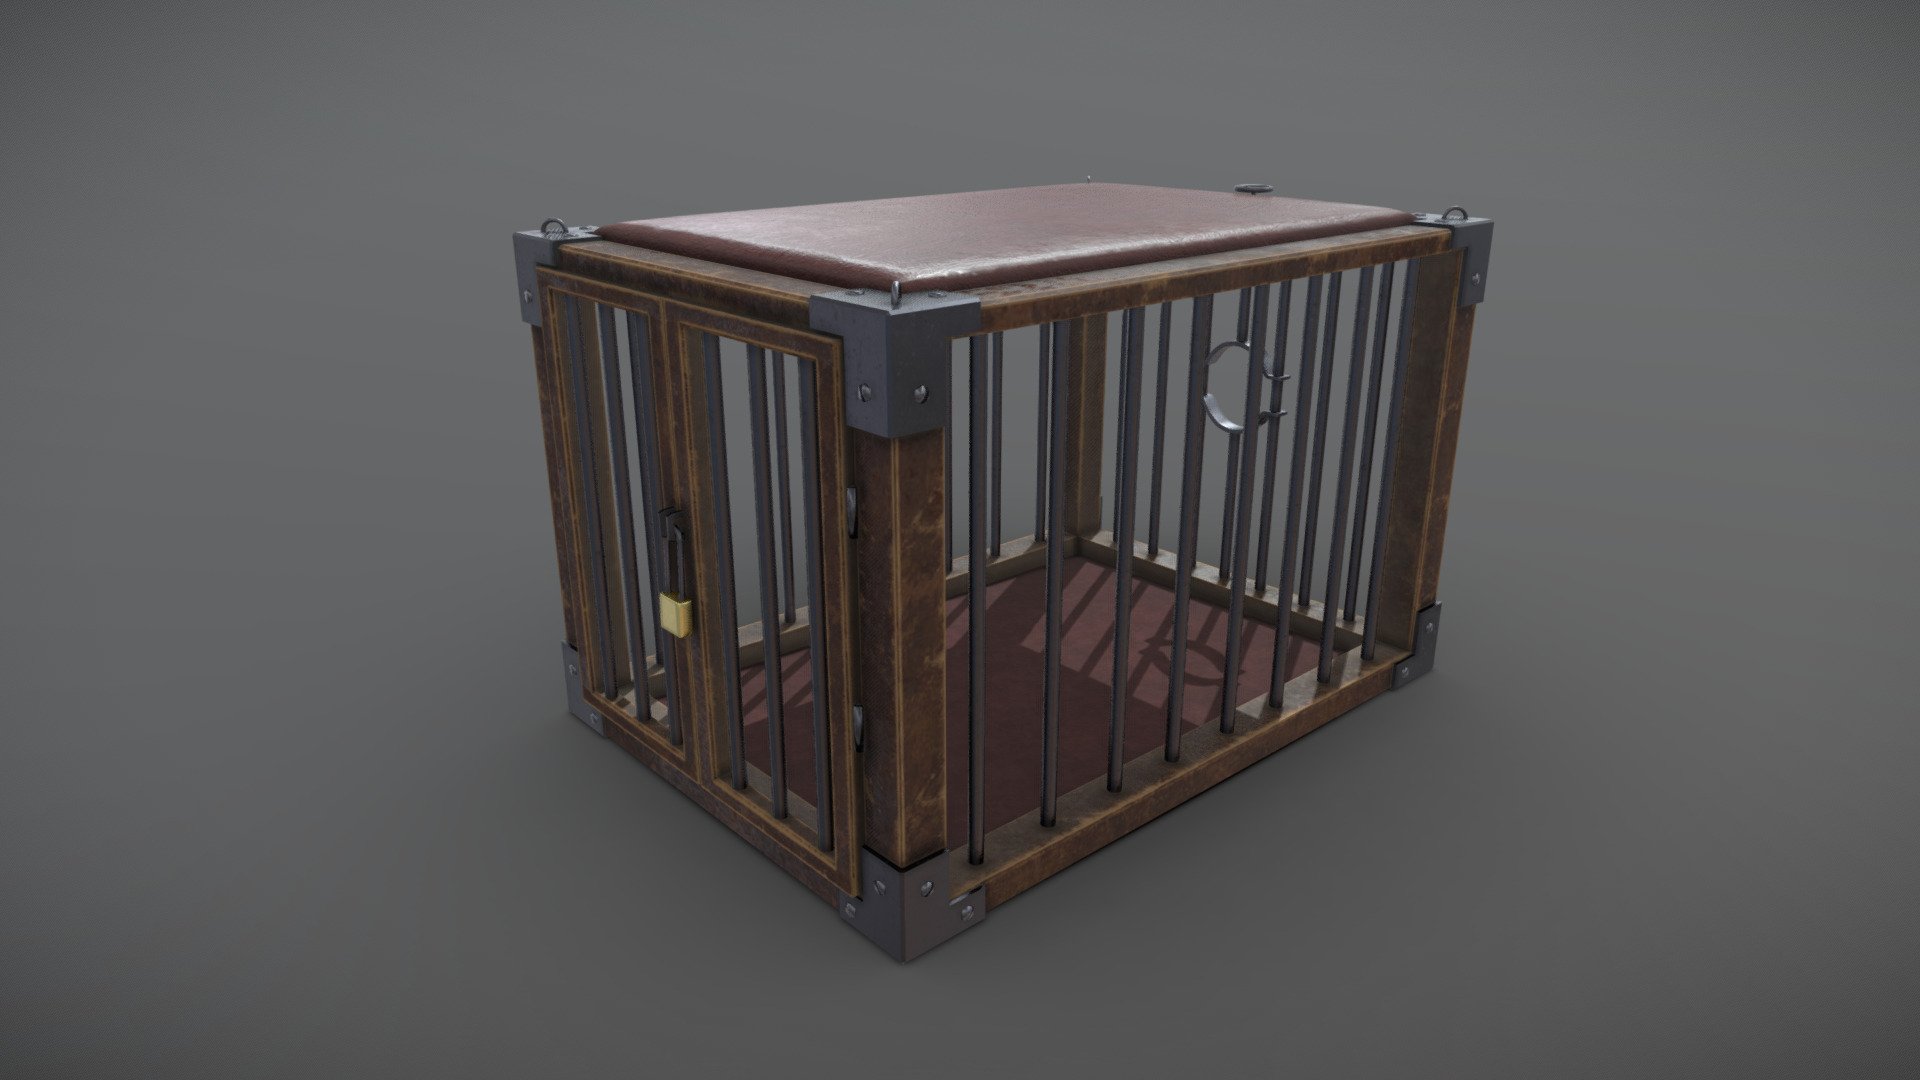 Taming Cage

Made in Blender and textured in Substance Painter. 

It was made a while ago, bit older model but wanted upload it here at Sketchfab 3d model